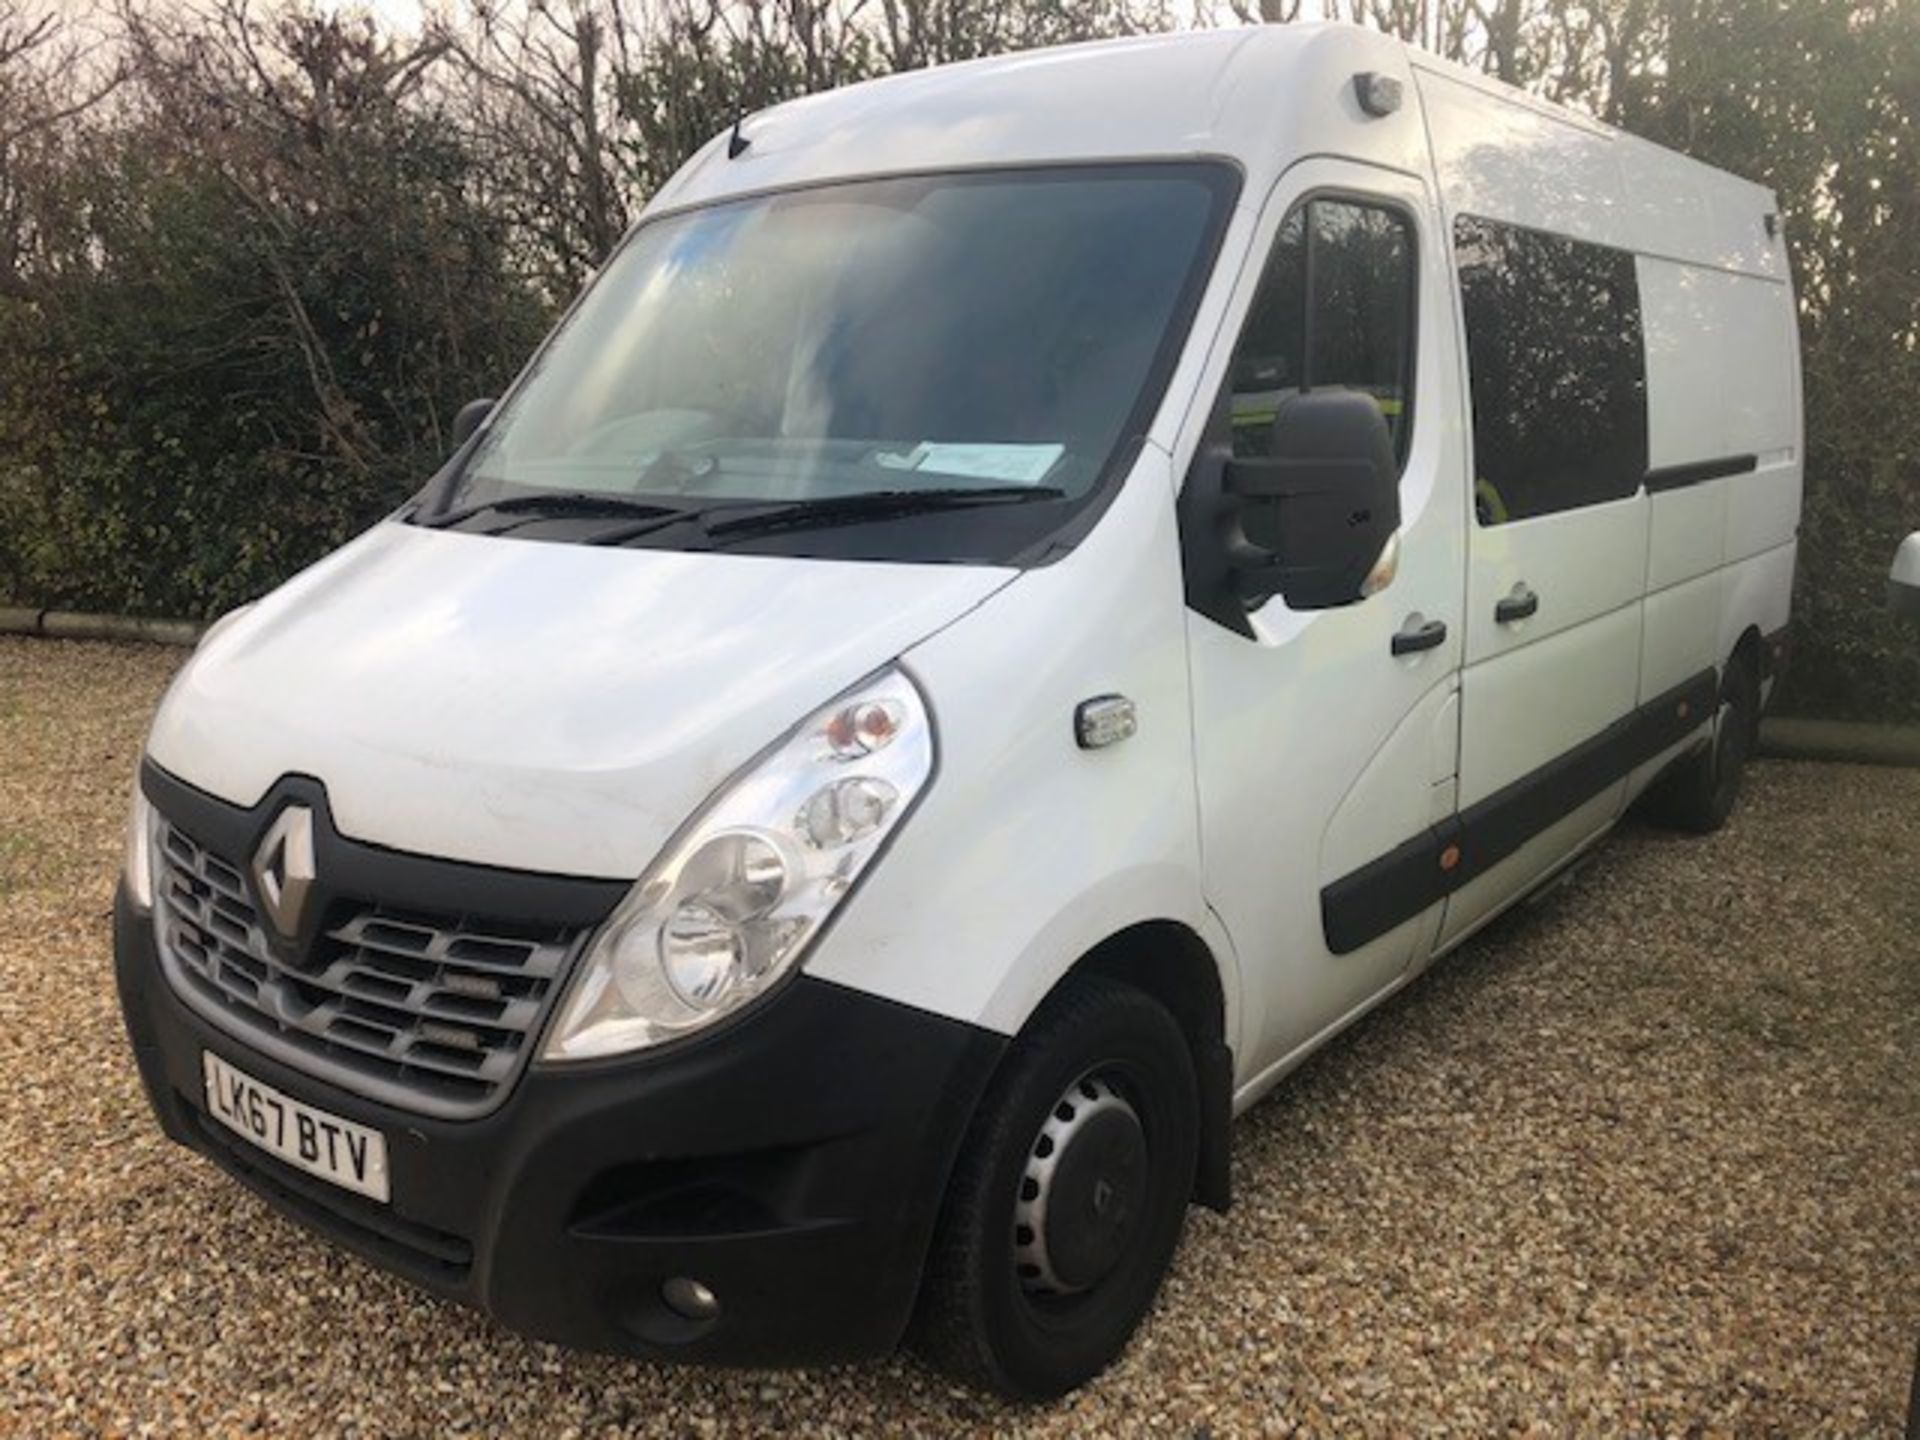 Renault Master LM130 Euro 6 Secure Cell Vehicle (2017)